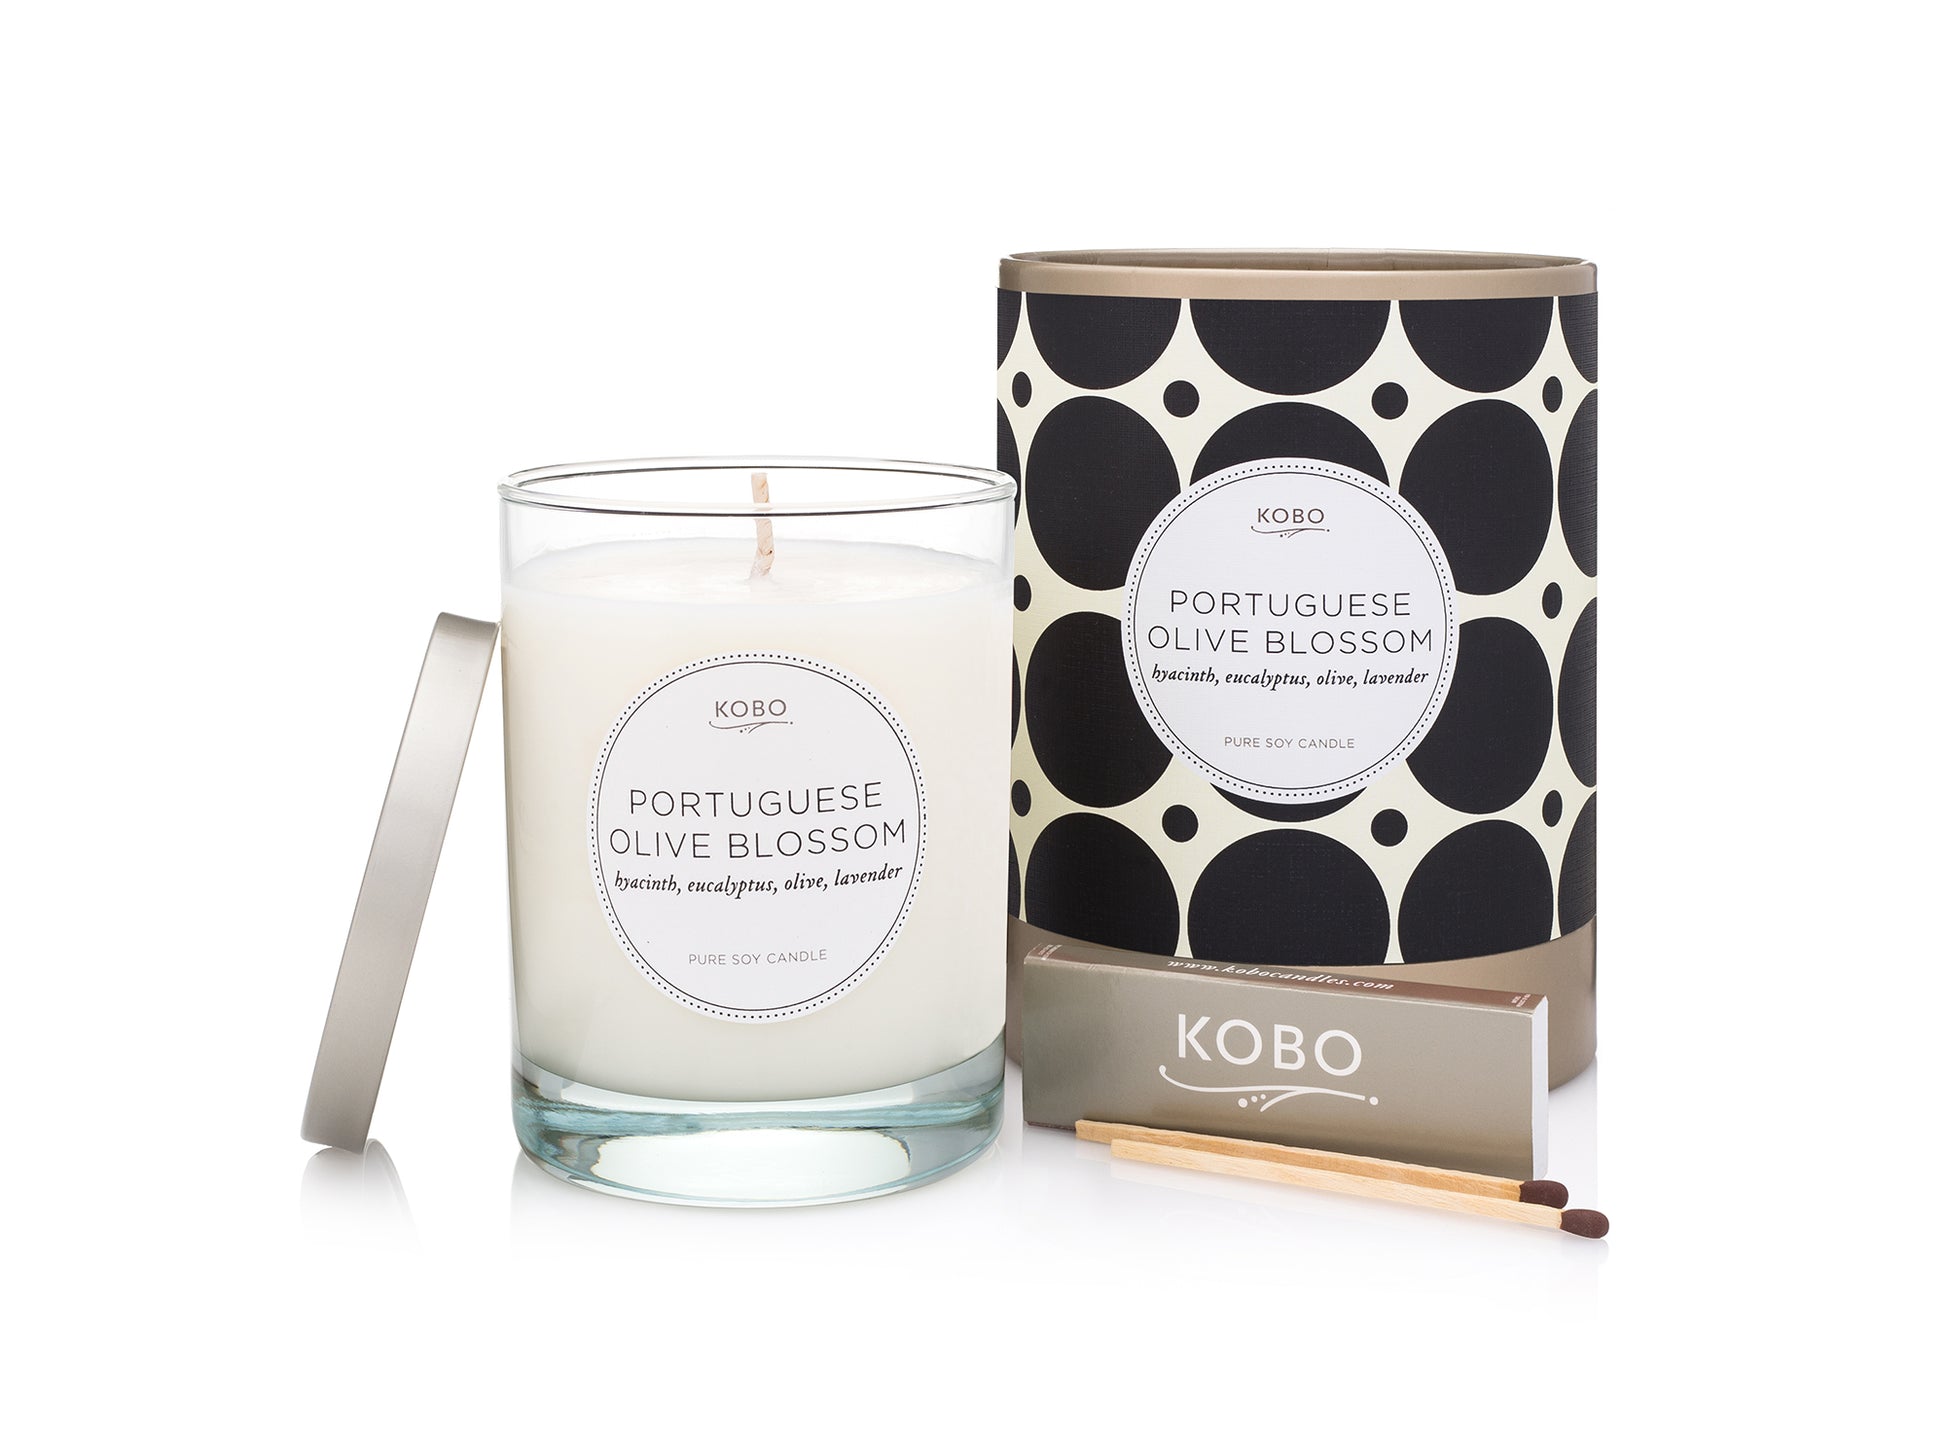 Primary Image of Portuguese Olive Blossom Coterie 11 oz Pure Soy Candle